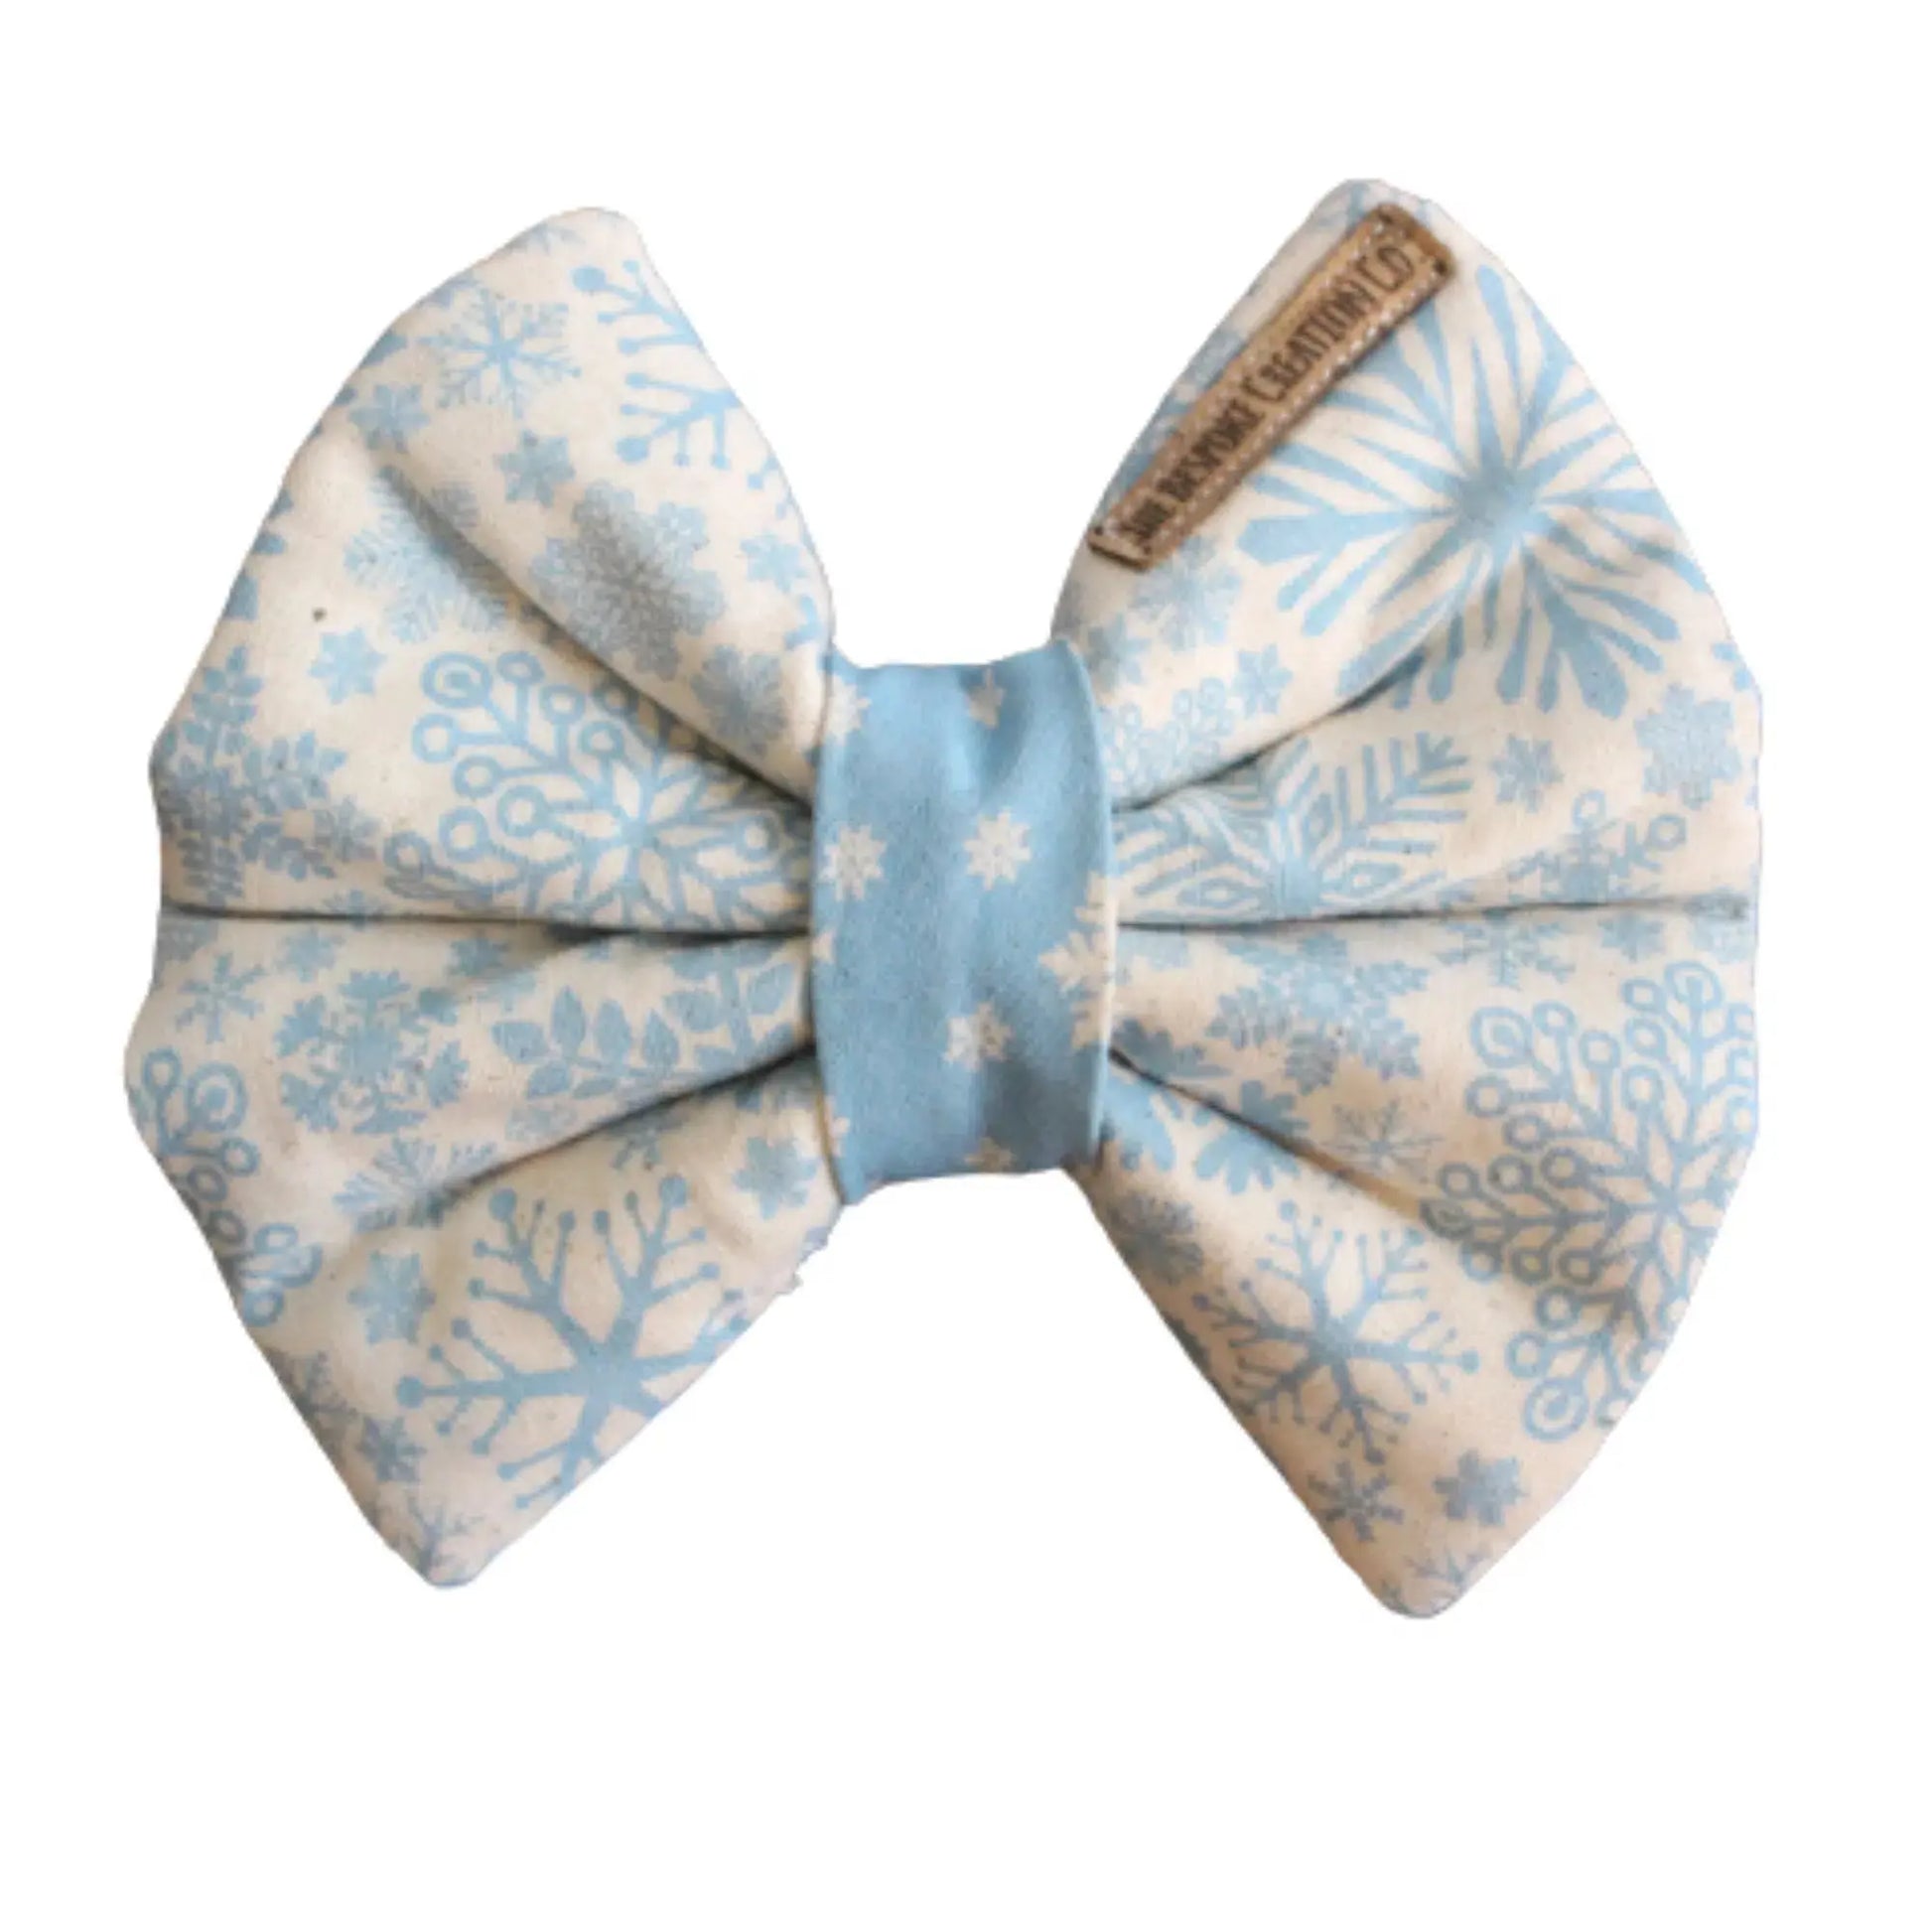 DOGUE | Christmas Bow Tie | Buy Online at DOGUE Australia